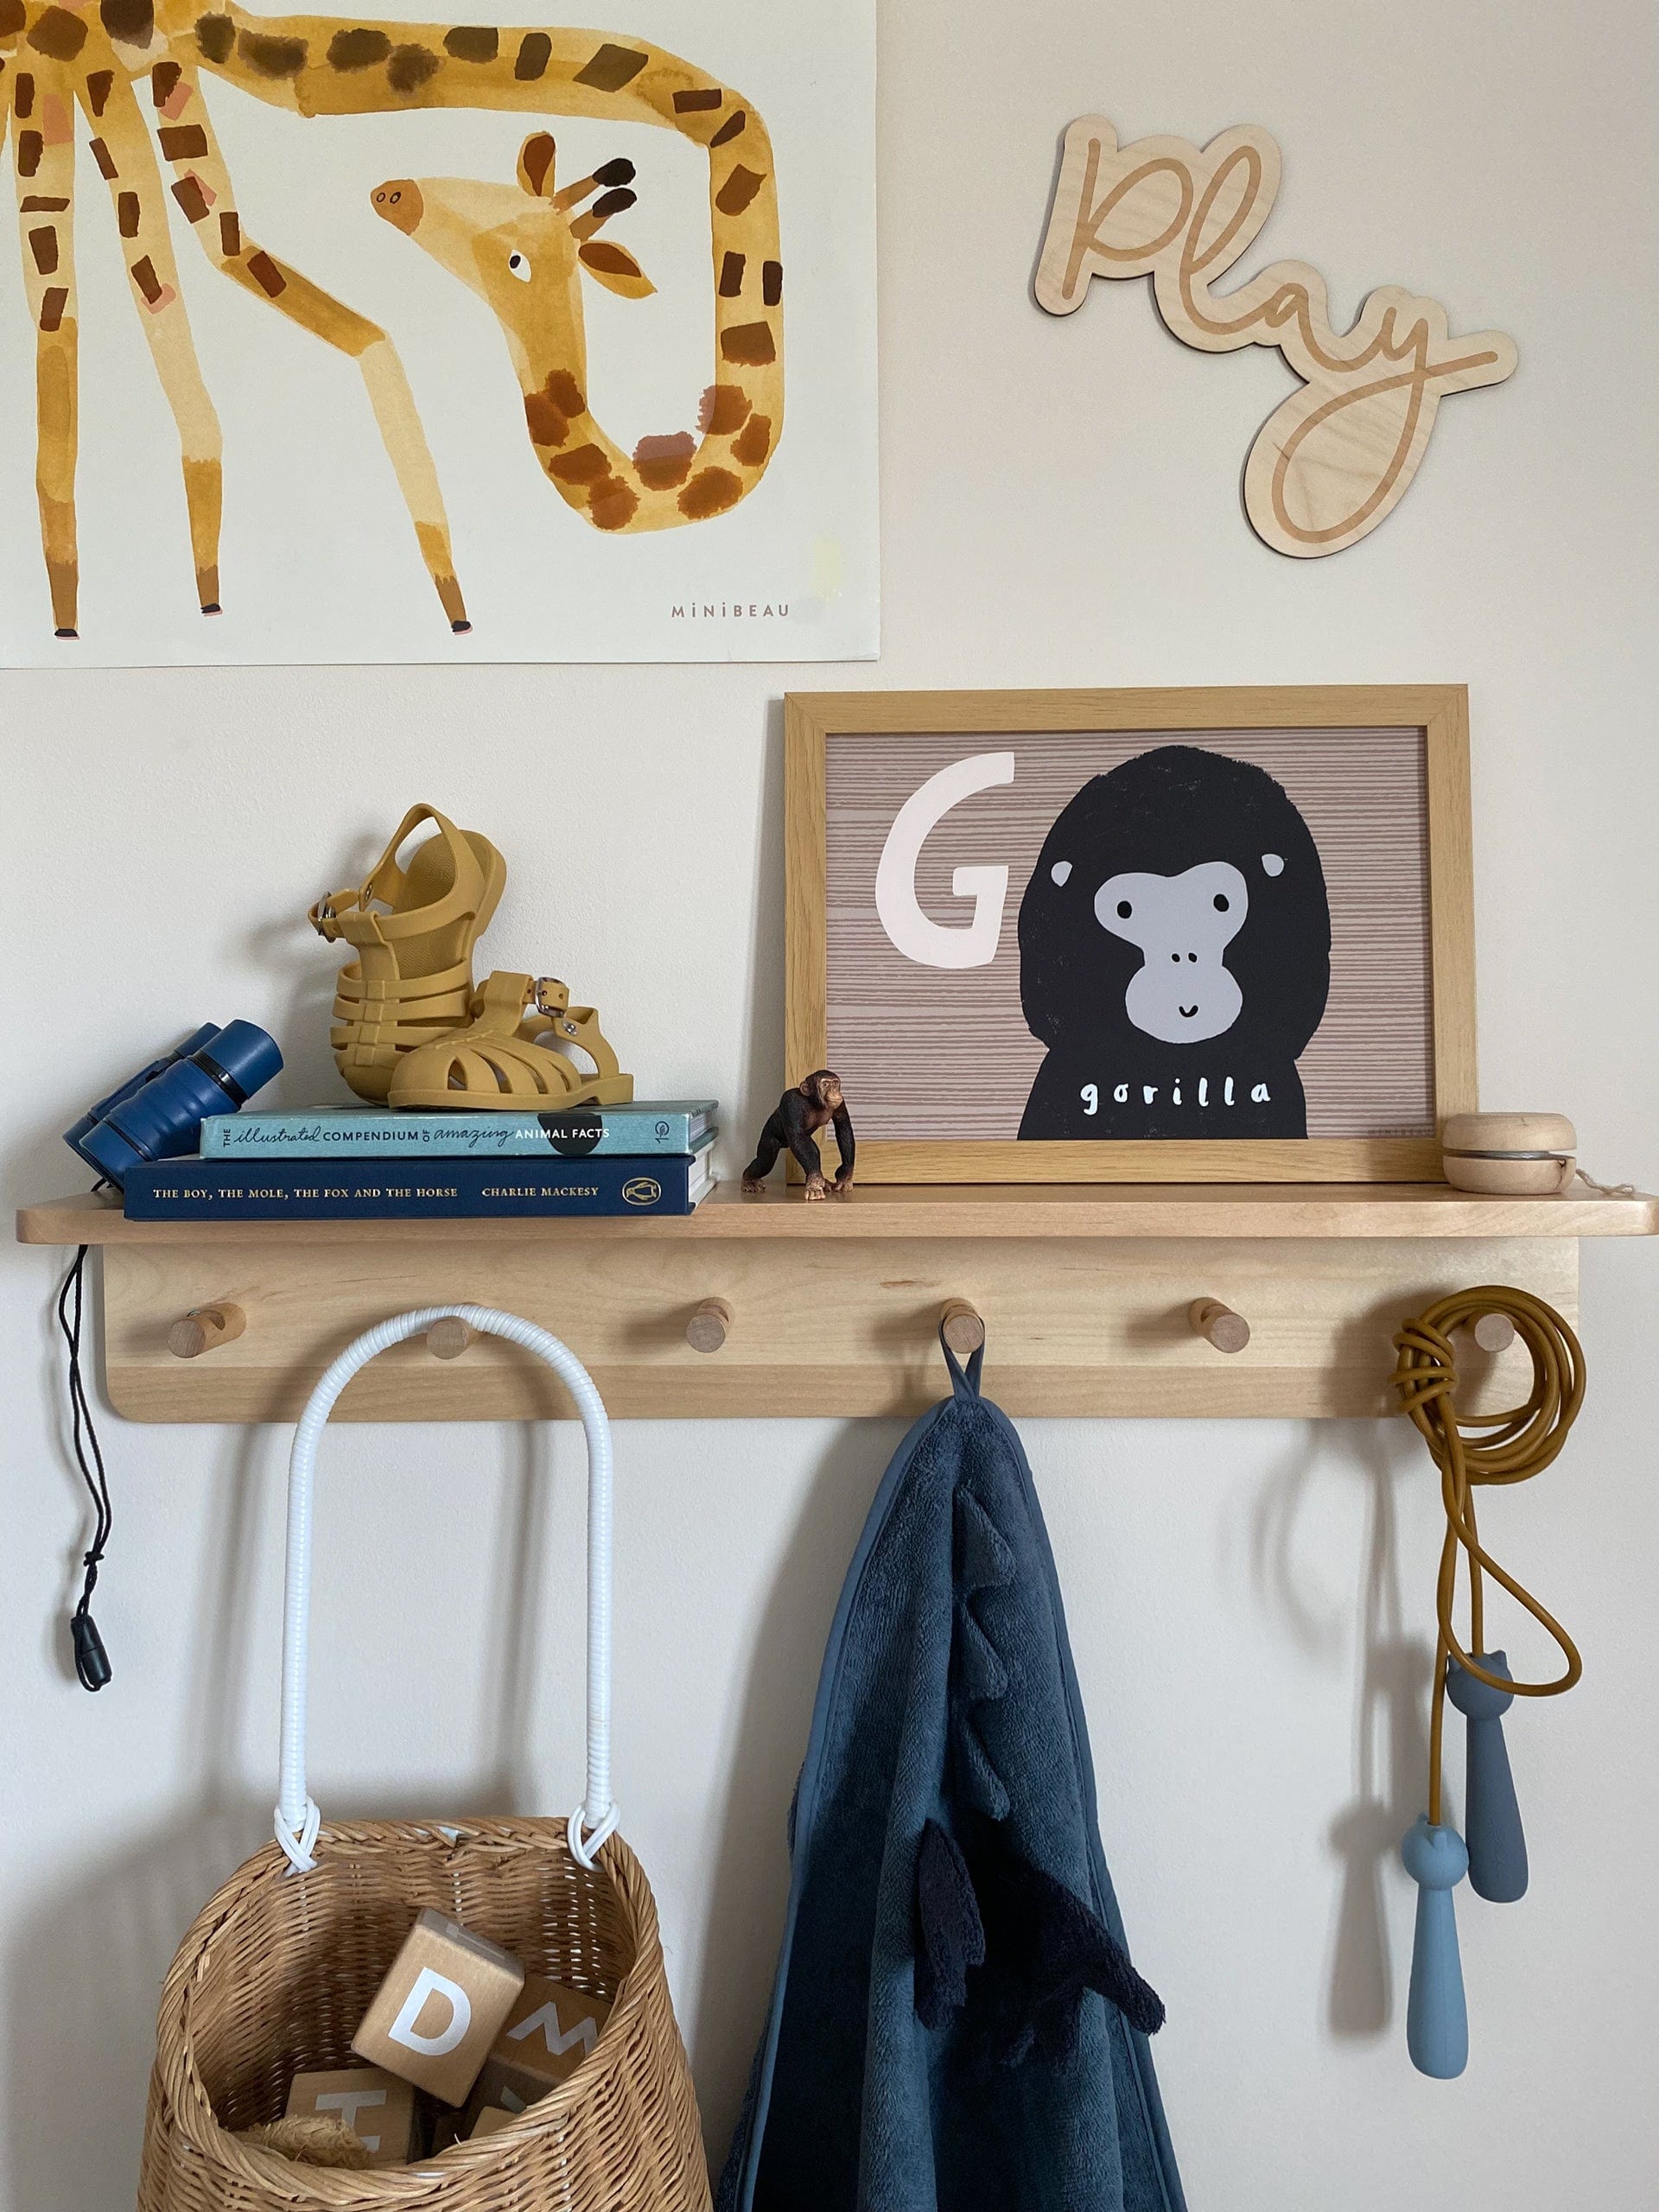 A wooden shelf with wooden pegs underneath with a Liewood blue dinosaur towel, and liewood blue cat skipping rope and Olli Ella Luggy with wooden alphabet blocks in hanging, with books, liewood mustard bre sandals, a toy gorilla, a wooden yoyo and our G is for gorilla art print in an wooden frame. On the wall above is our Giraffe art print and a wooden cutout of the word PLAY.